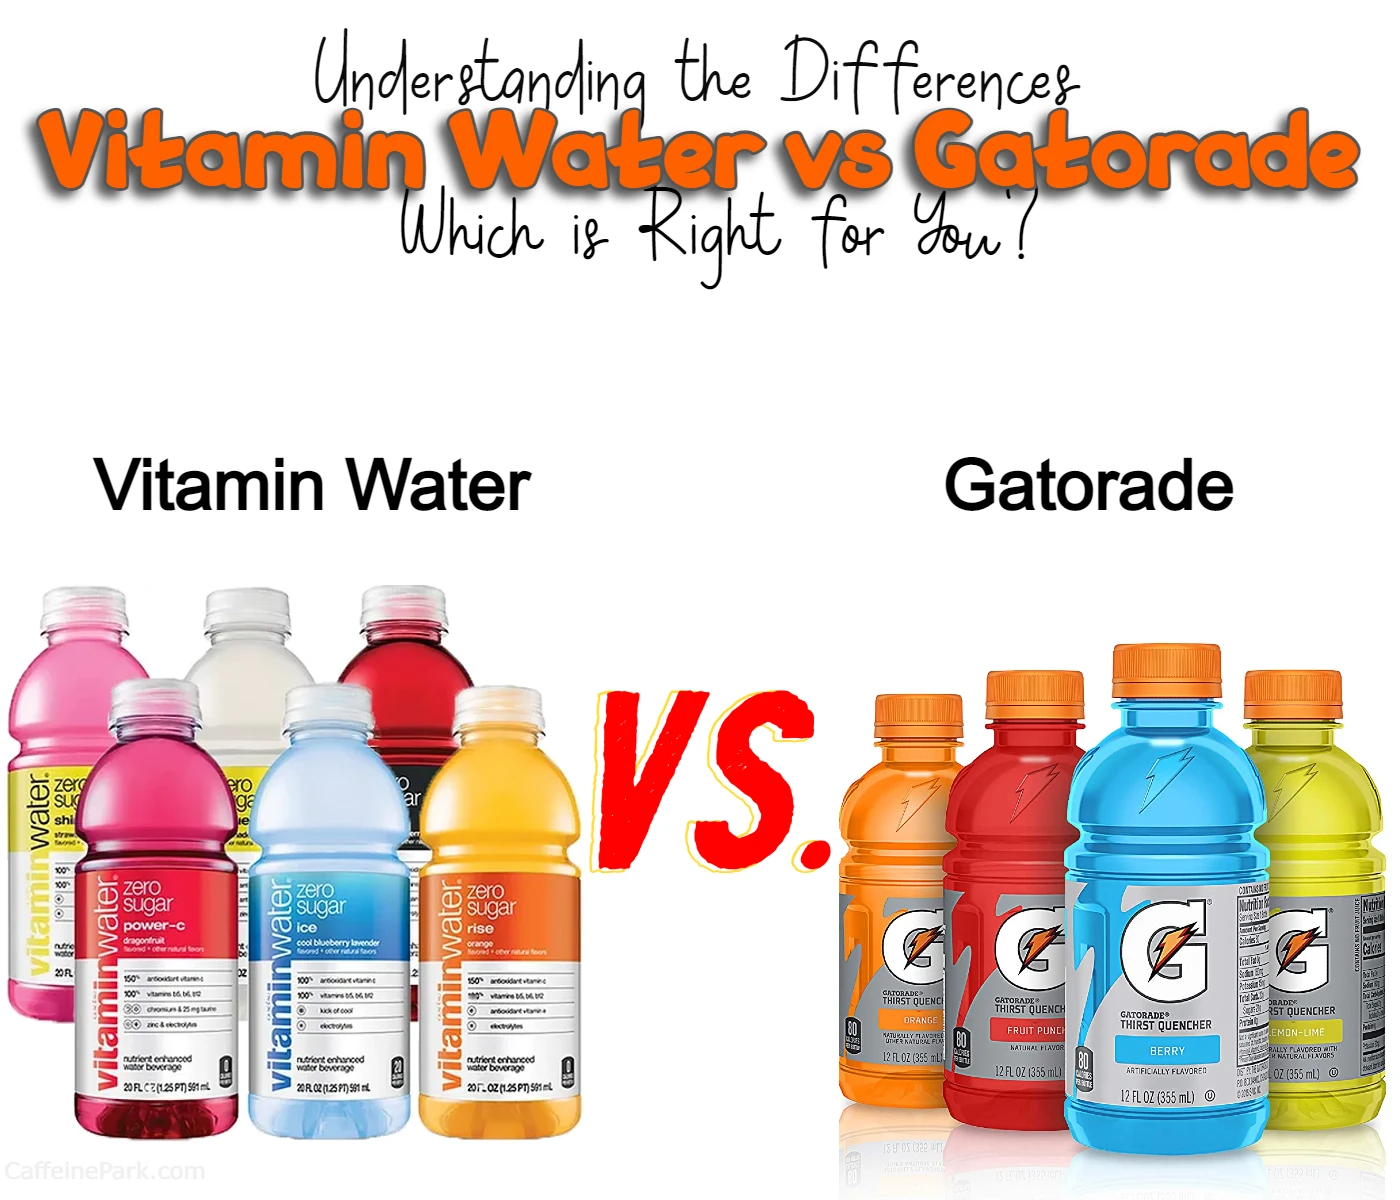 Vitamin Water vs Gatorade: What's the Difference?